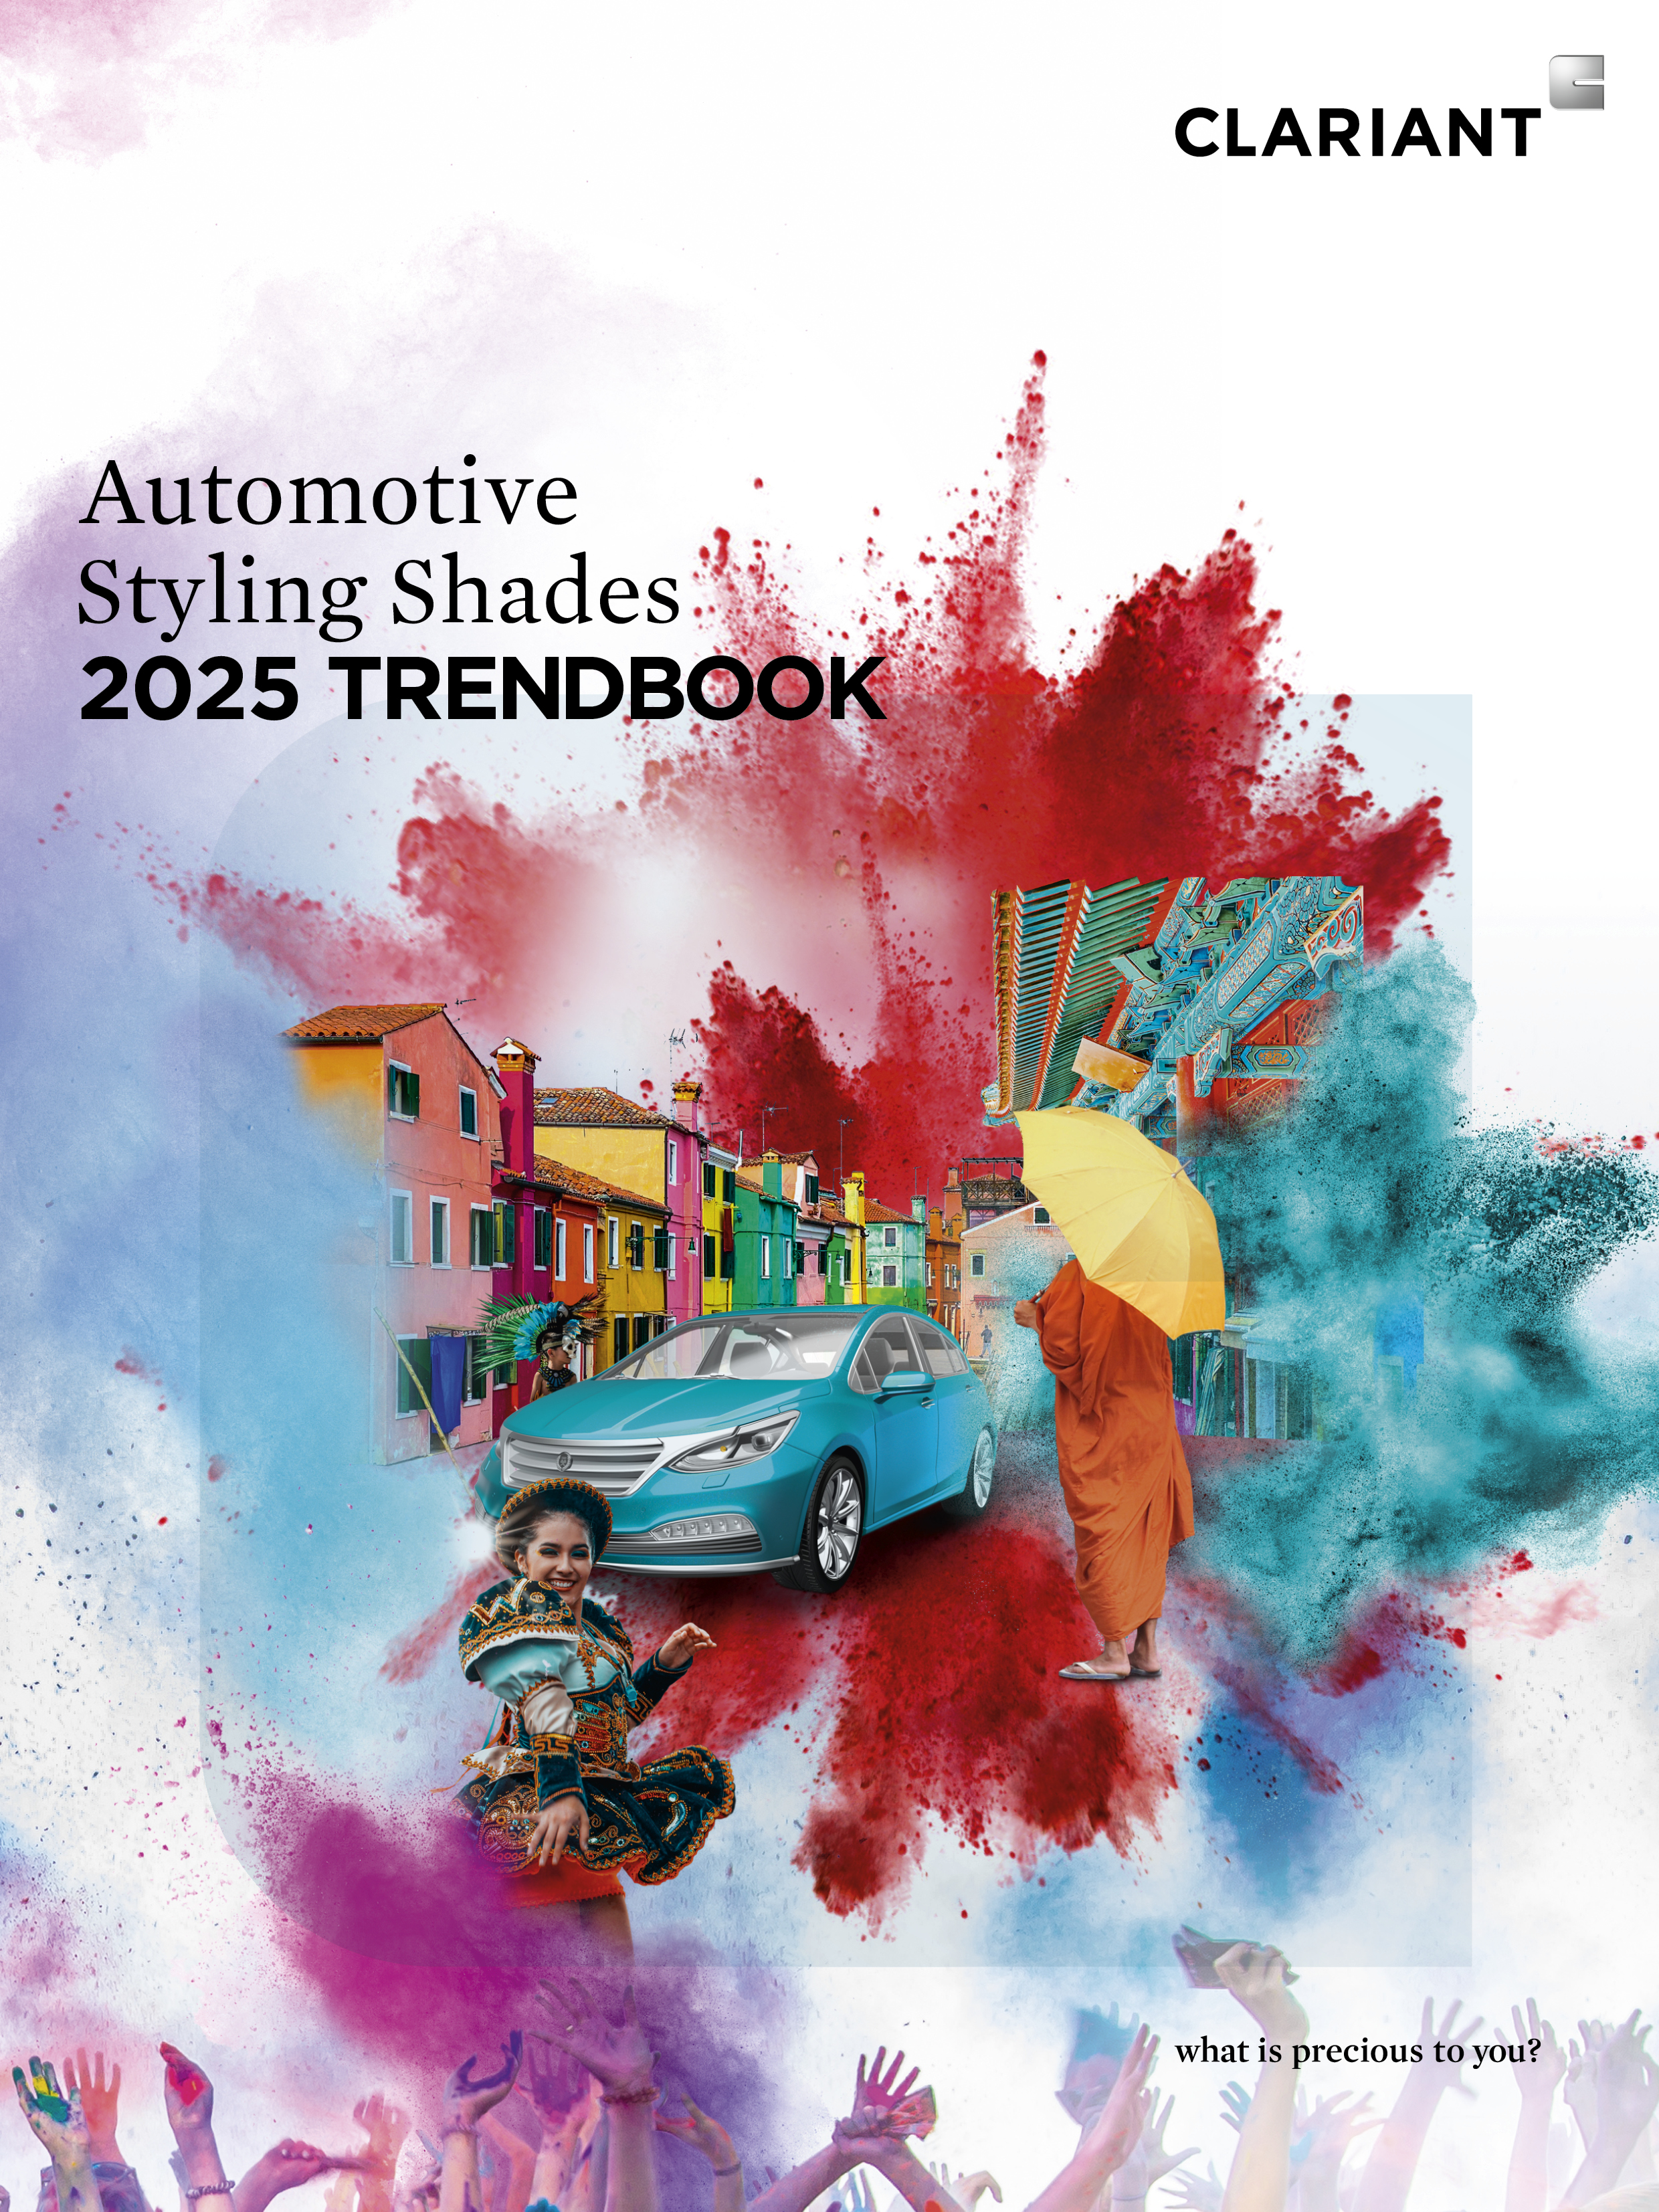 Cover of Clariant's brand new Automotive Styling Shades 2025 Trendbook. 
(Photo: Clariant)